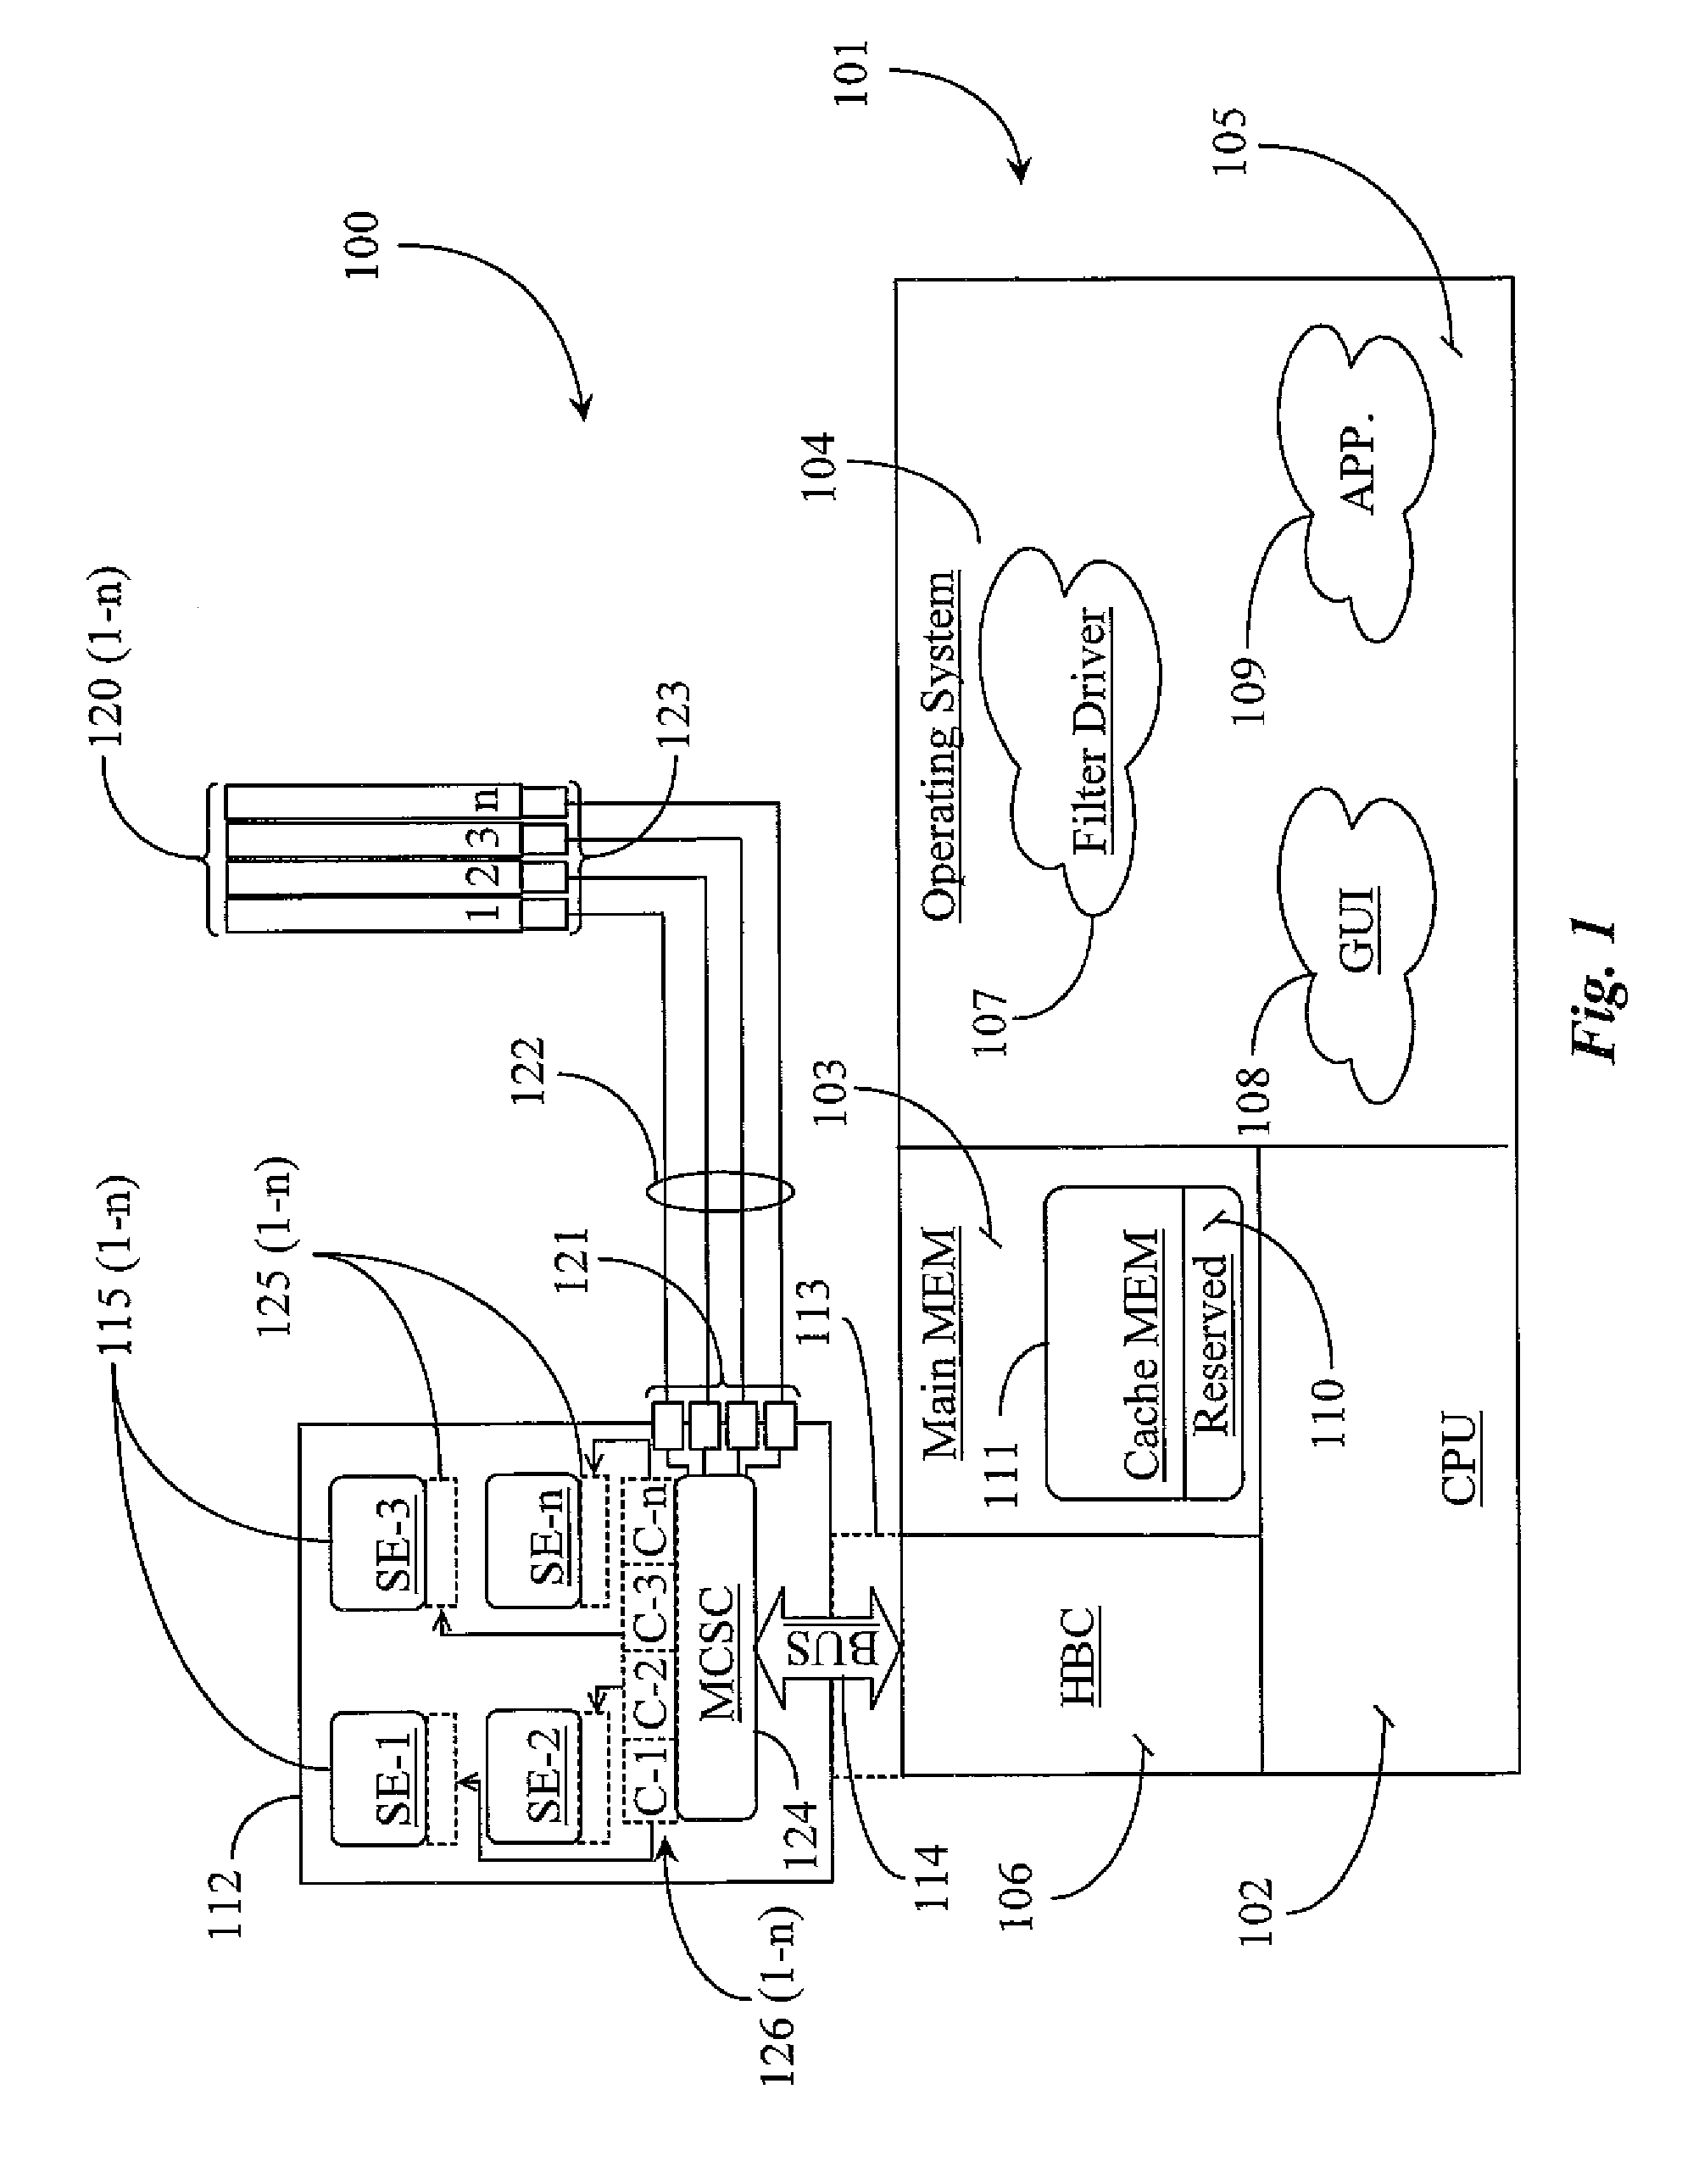 Method for Controlling Performance Aspects of a Data Storage and Access Routine